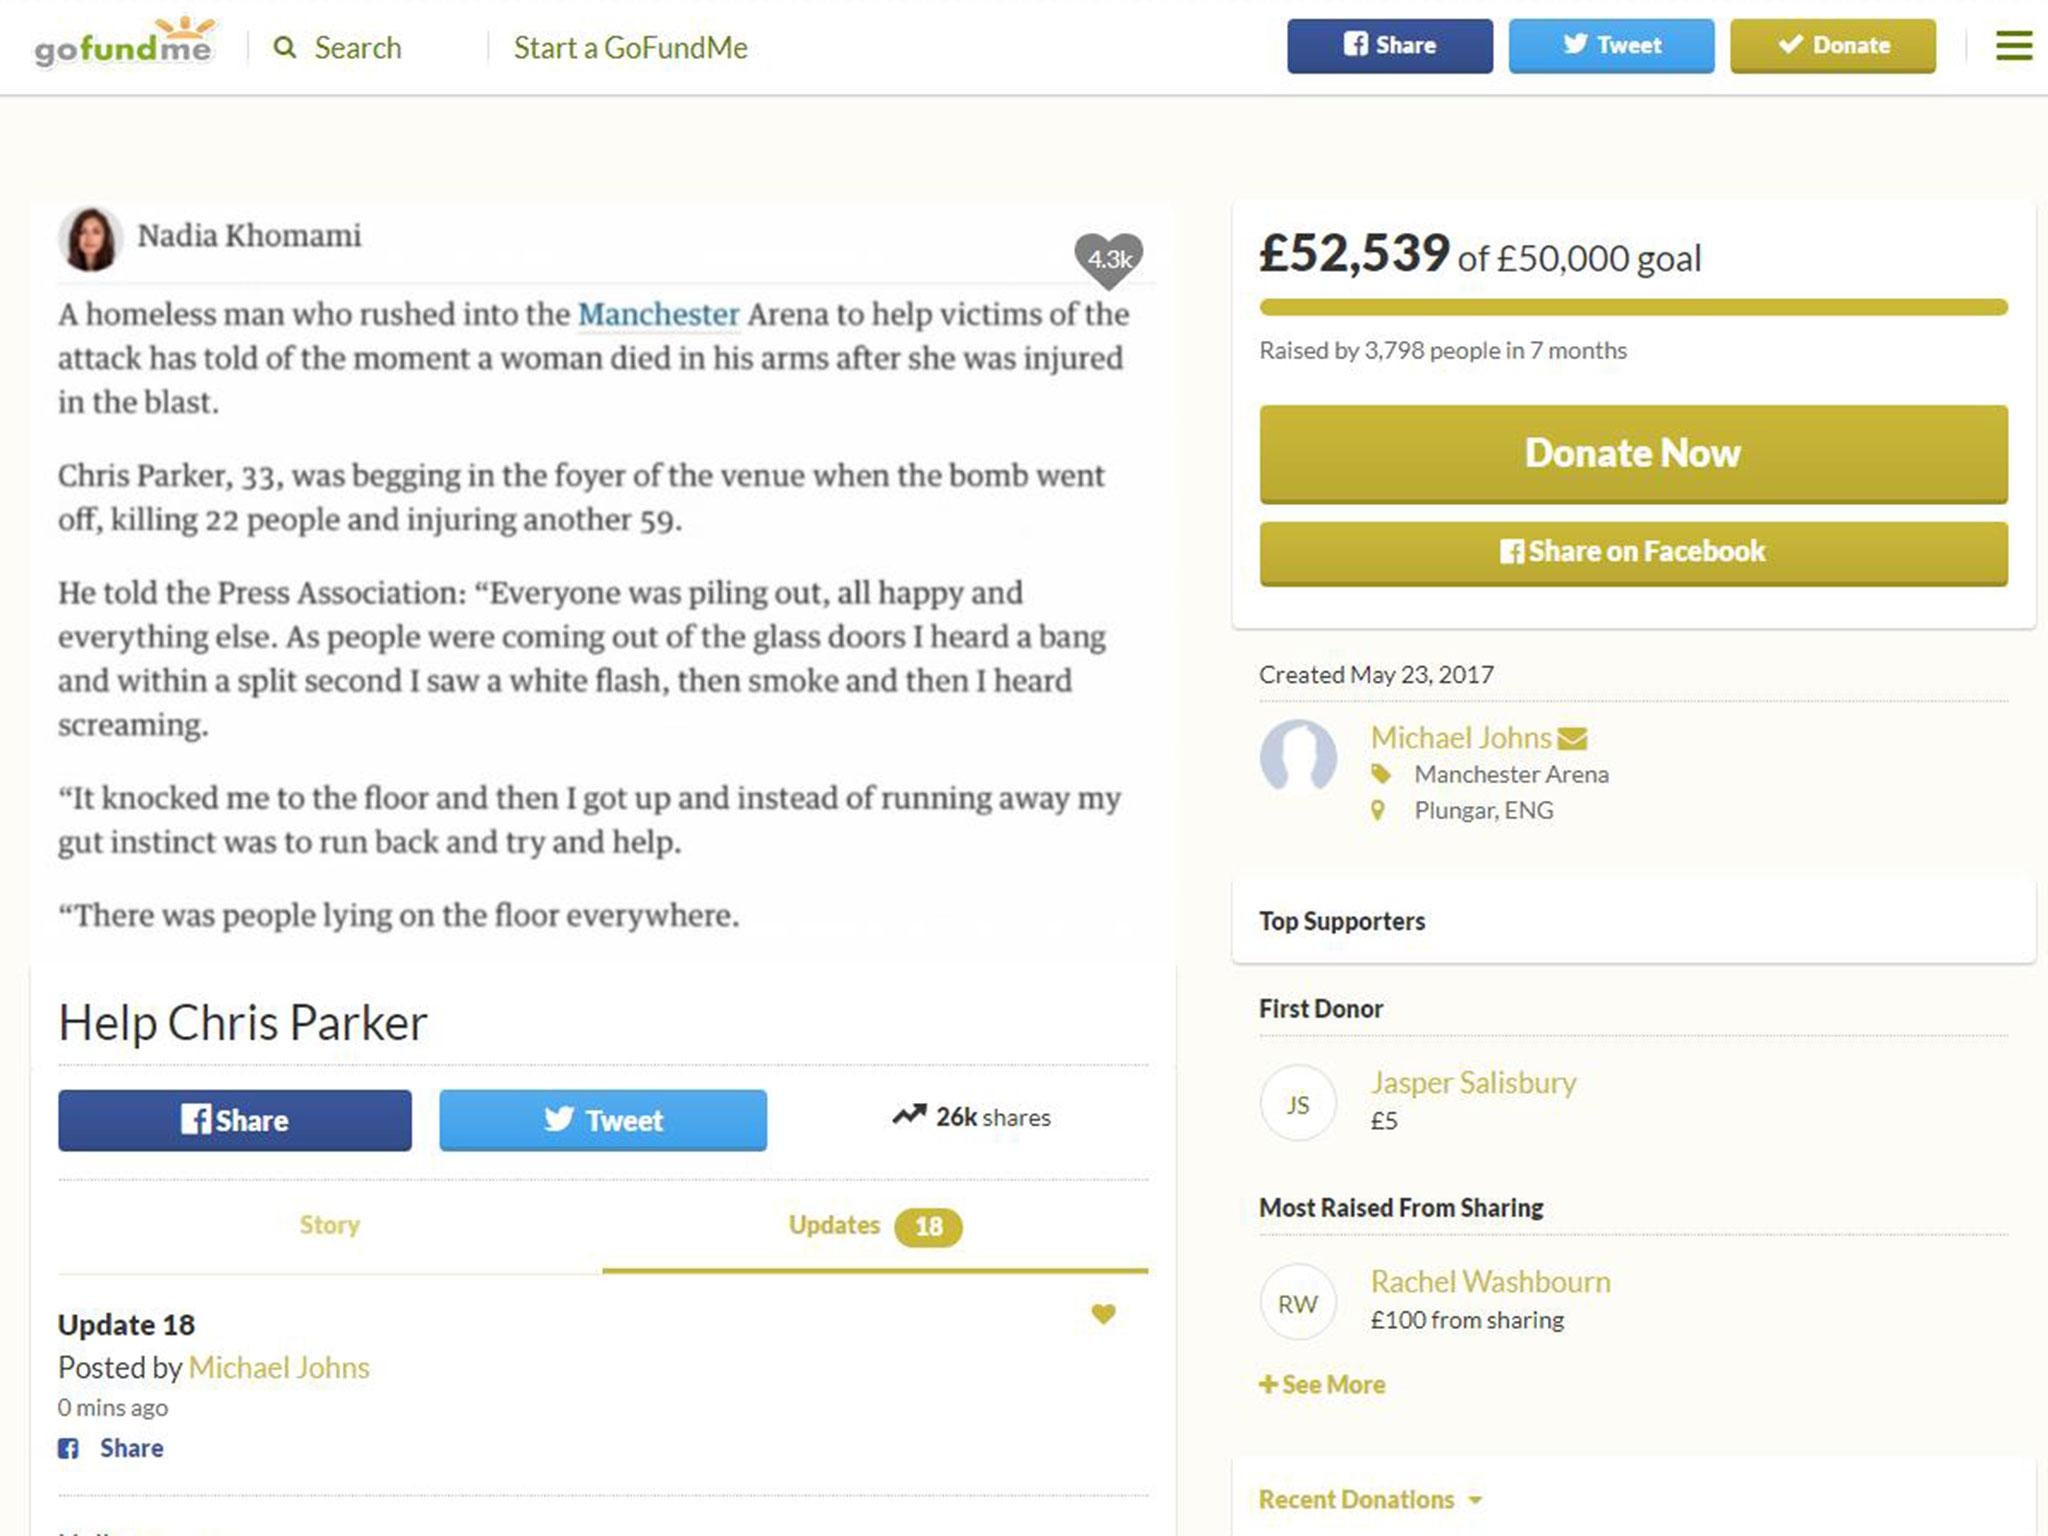 More than £52,000 was raised for Chris Parker by well-wishers